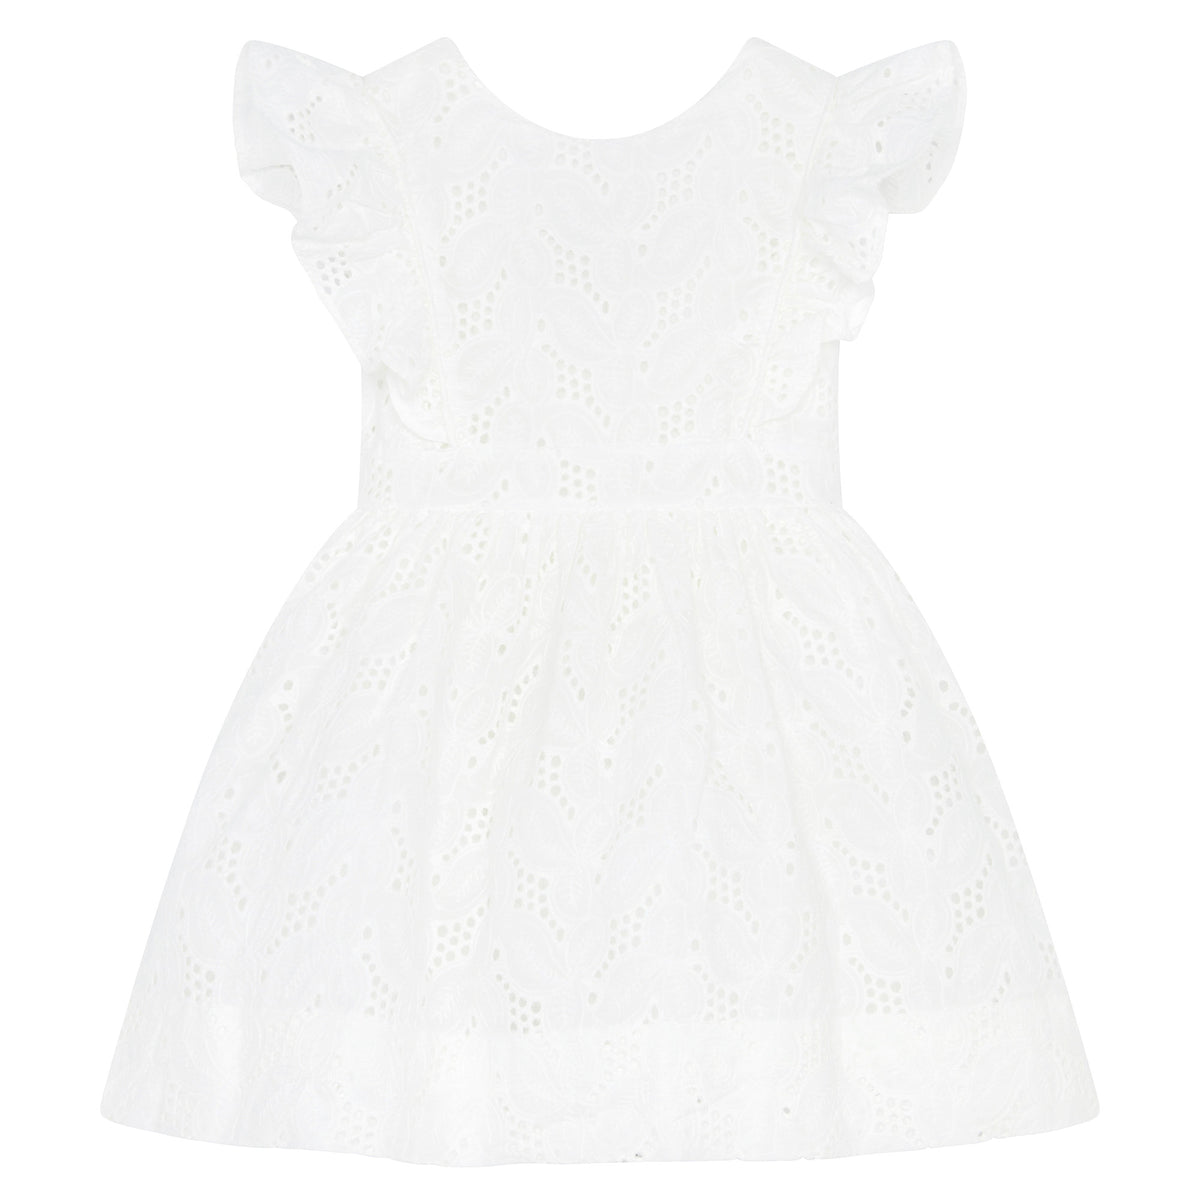 Little Princess Catherine Embroidered Cotton Girls Dress White | Holly Hastie London